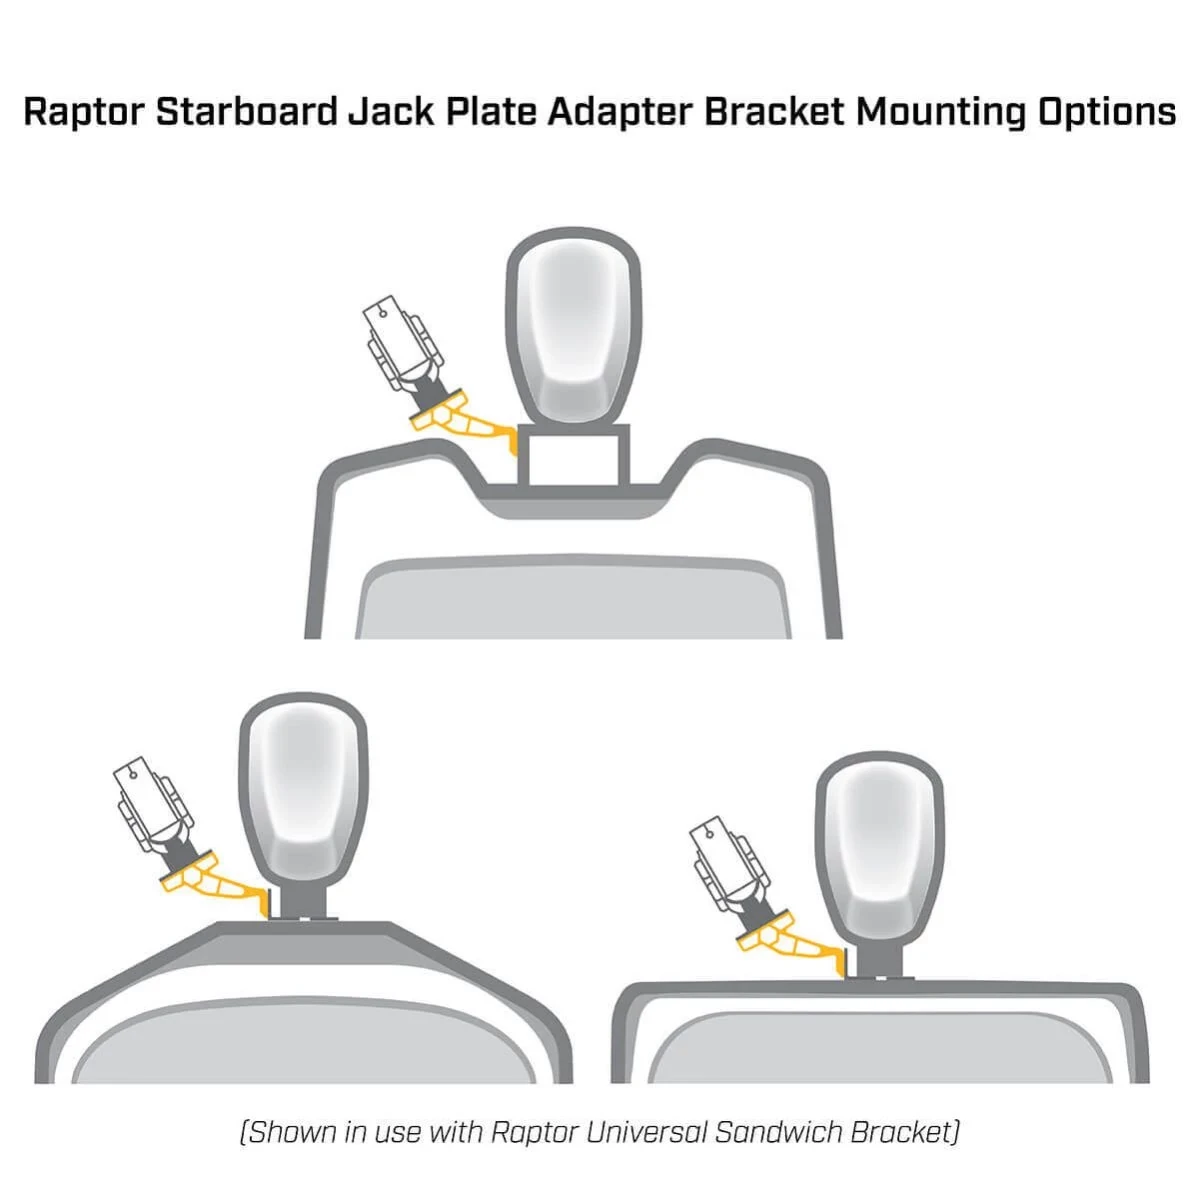 Illustration showing starboard jack plate mounting options on various transoms